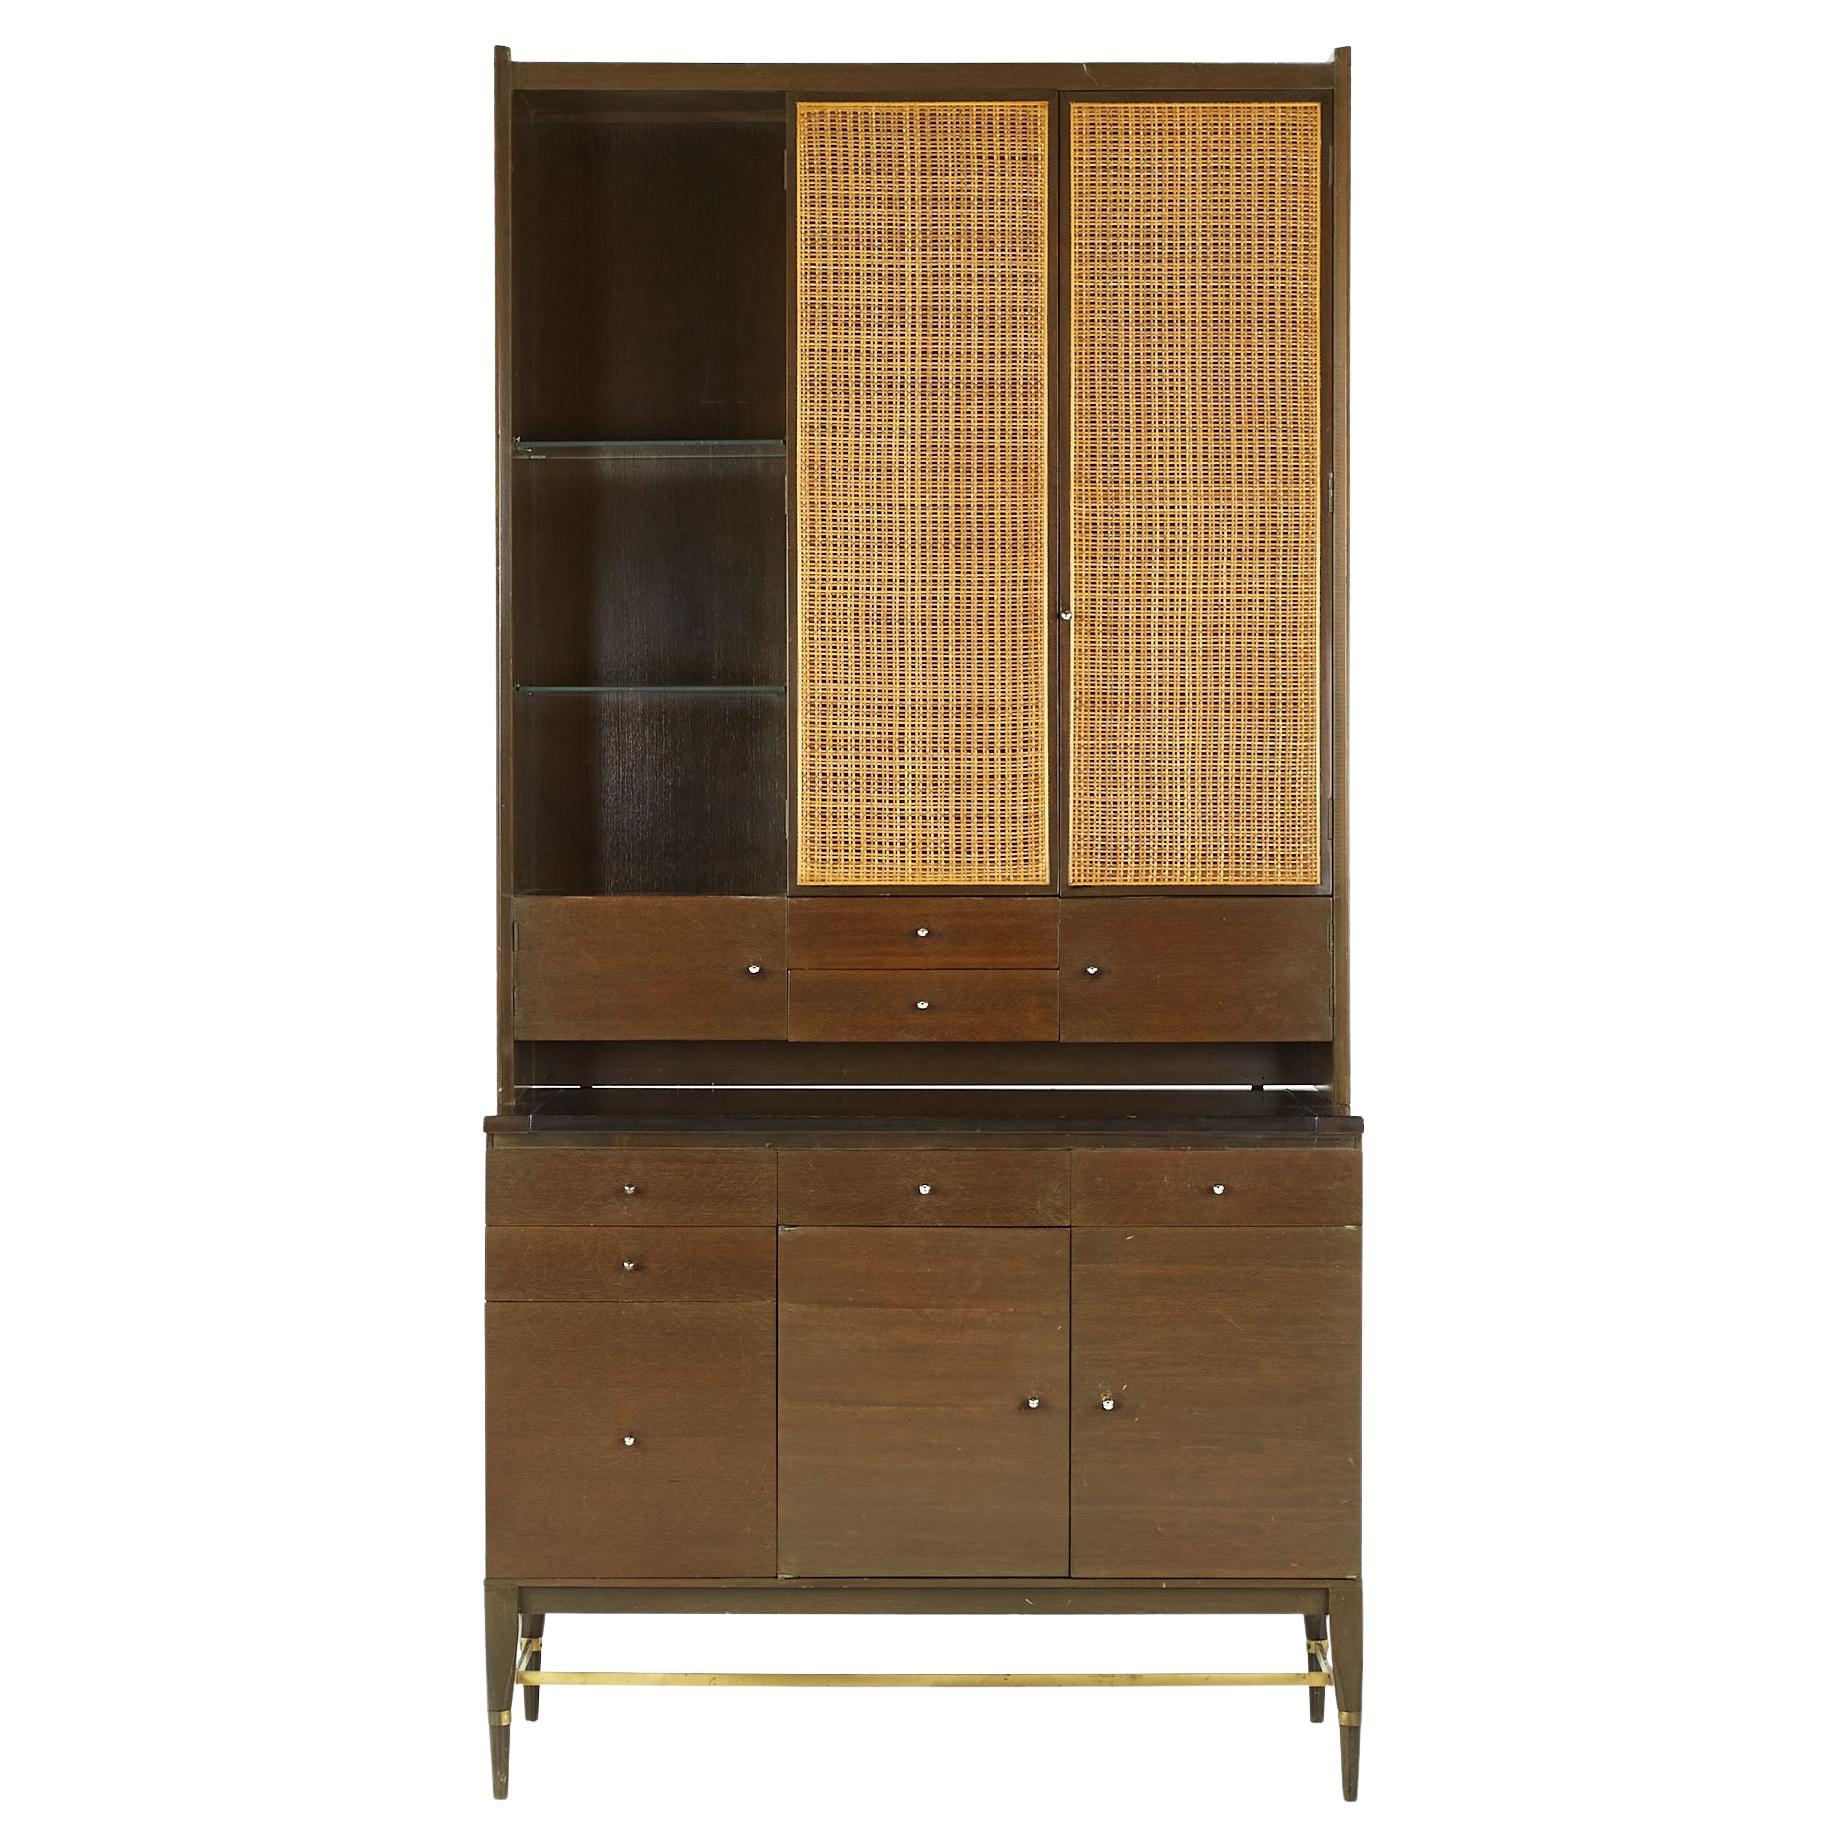 SOLD 06/07/23 aul McCobb Connoisseur Collection MCM Mahogany Cane Bar Cabinet